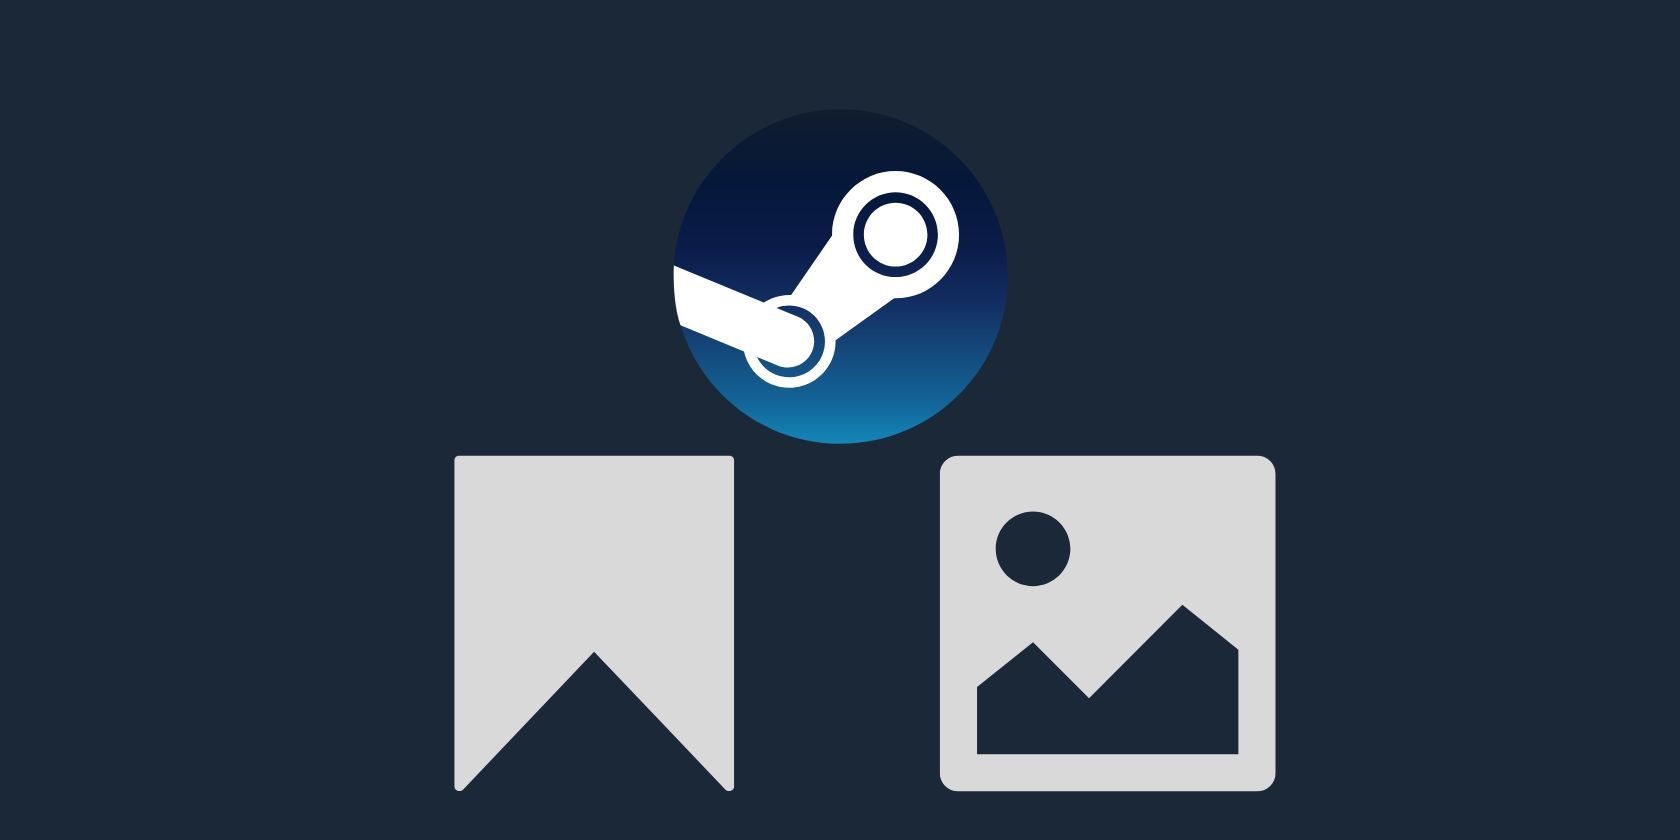 The Steam logo with a cartoon vector of a bookmark and image icon underneath